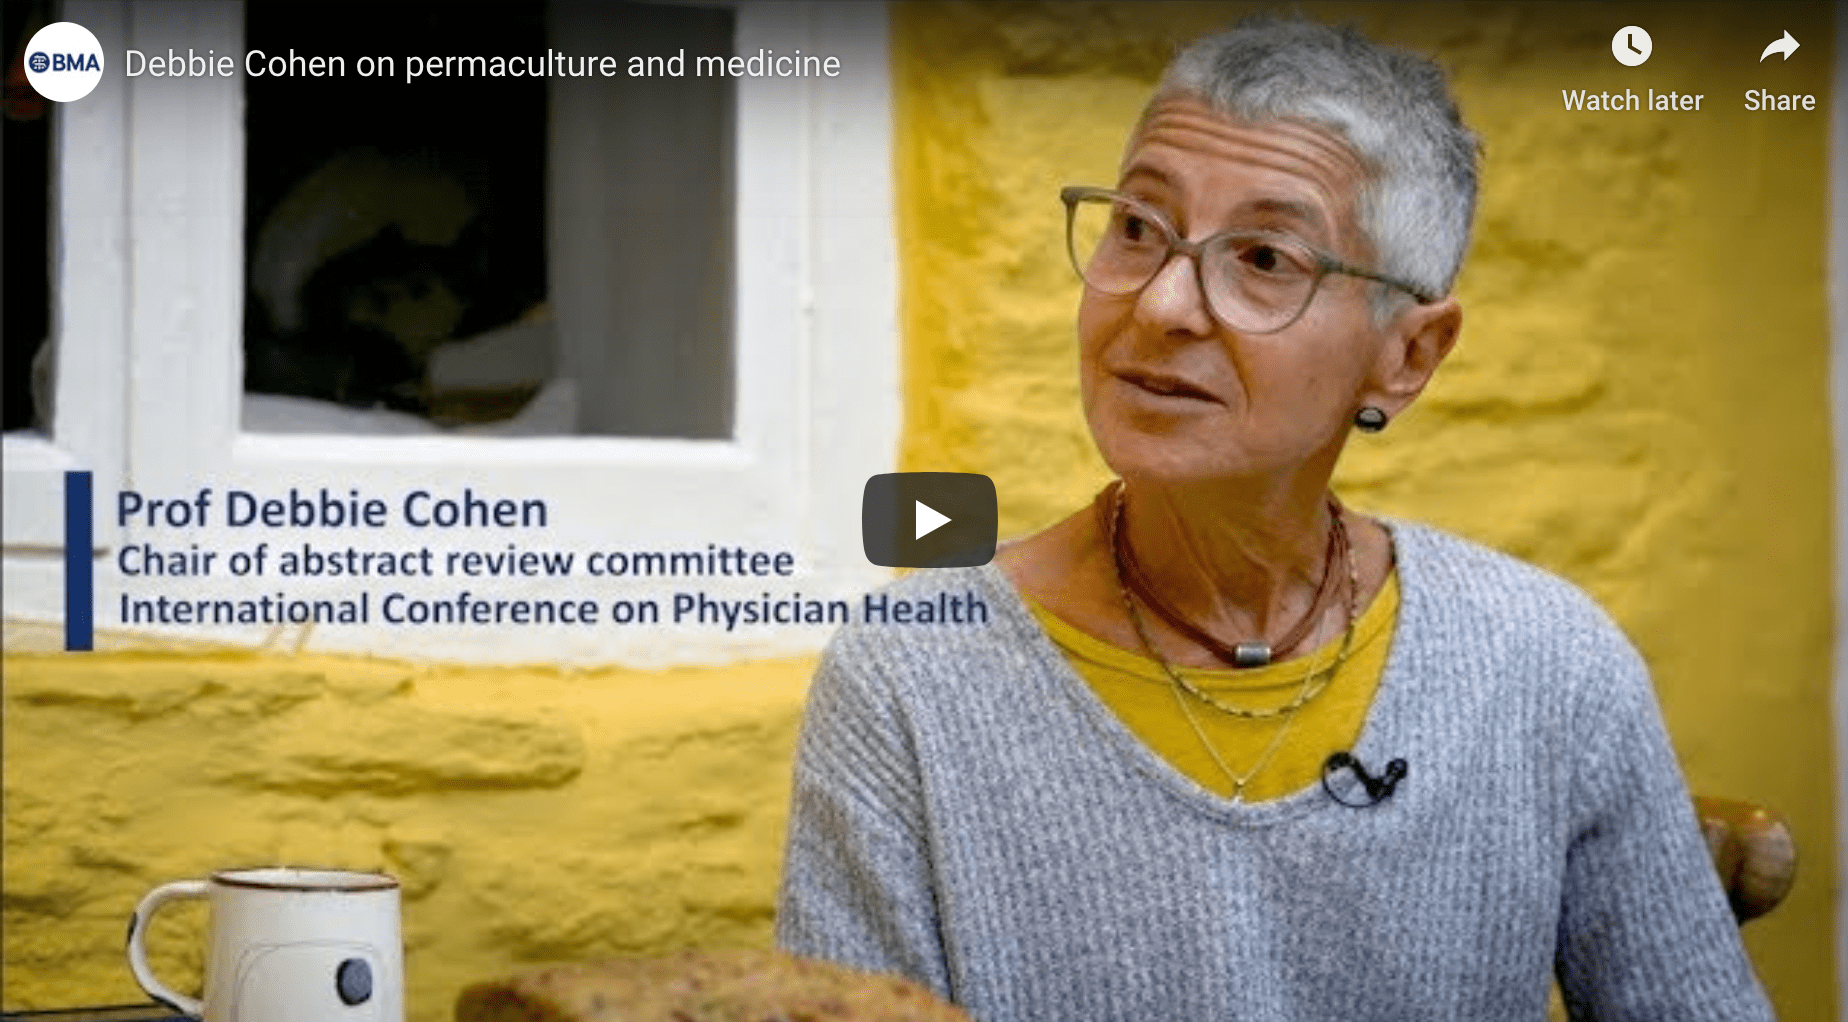 A still of Debbie Cohen for a youtube video on permaculture and medicine